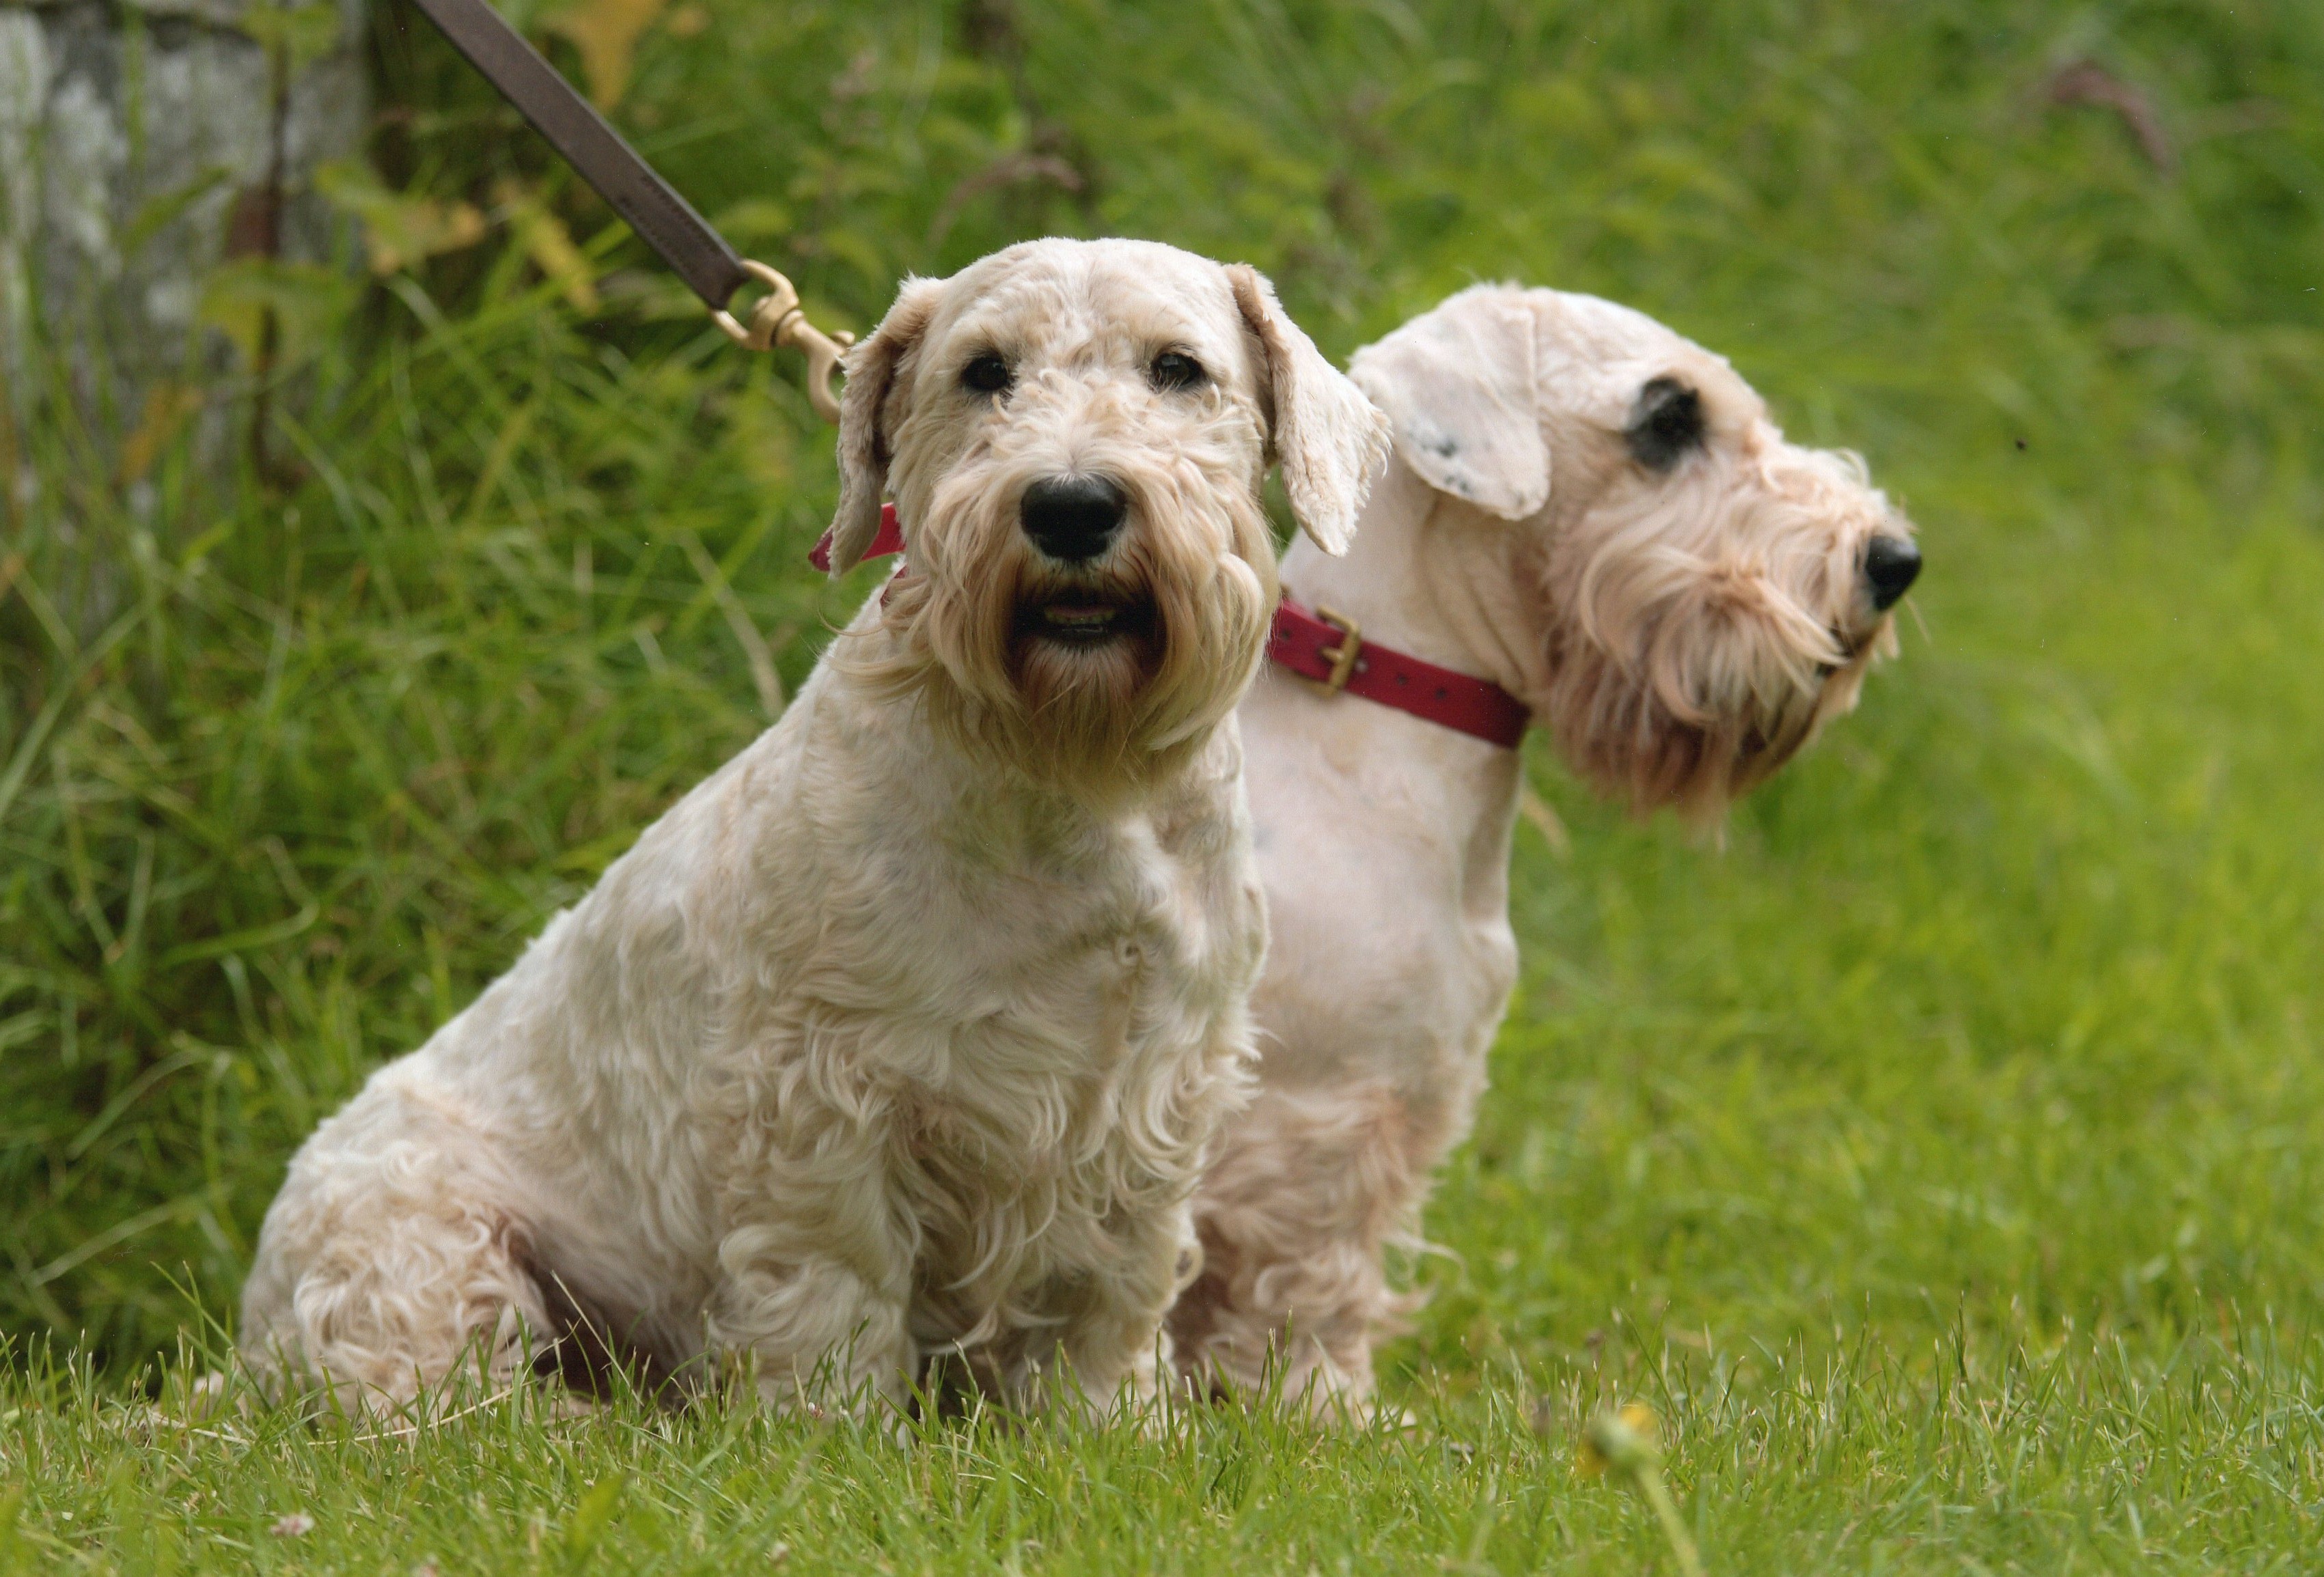 Sealyham Terrier Dog: Sealyham Sealyham Terrier Dogs In The Forest Breed